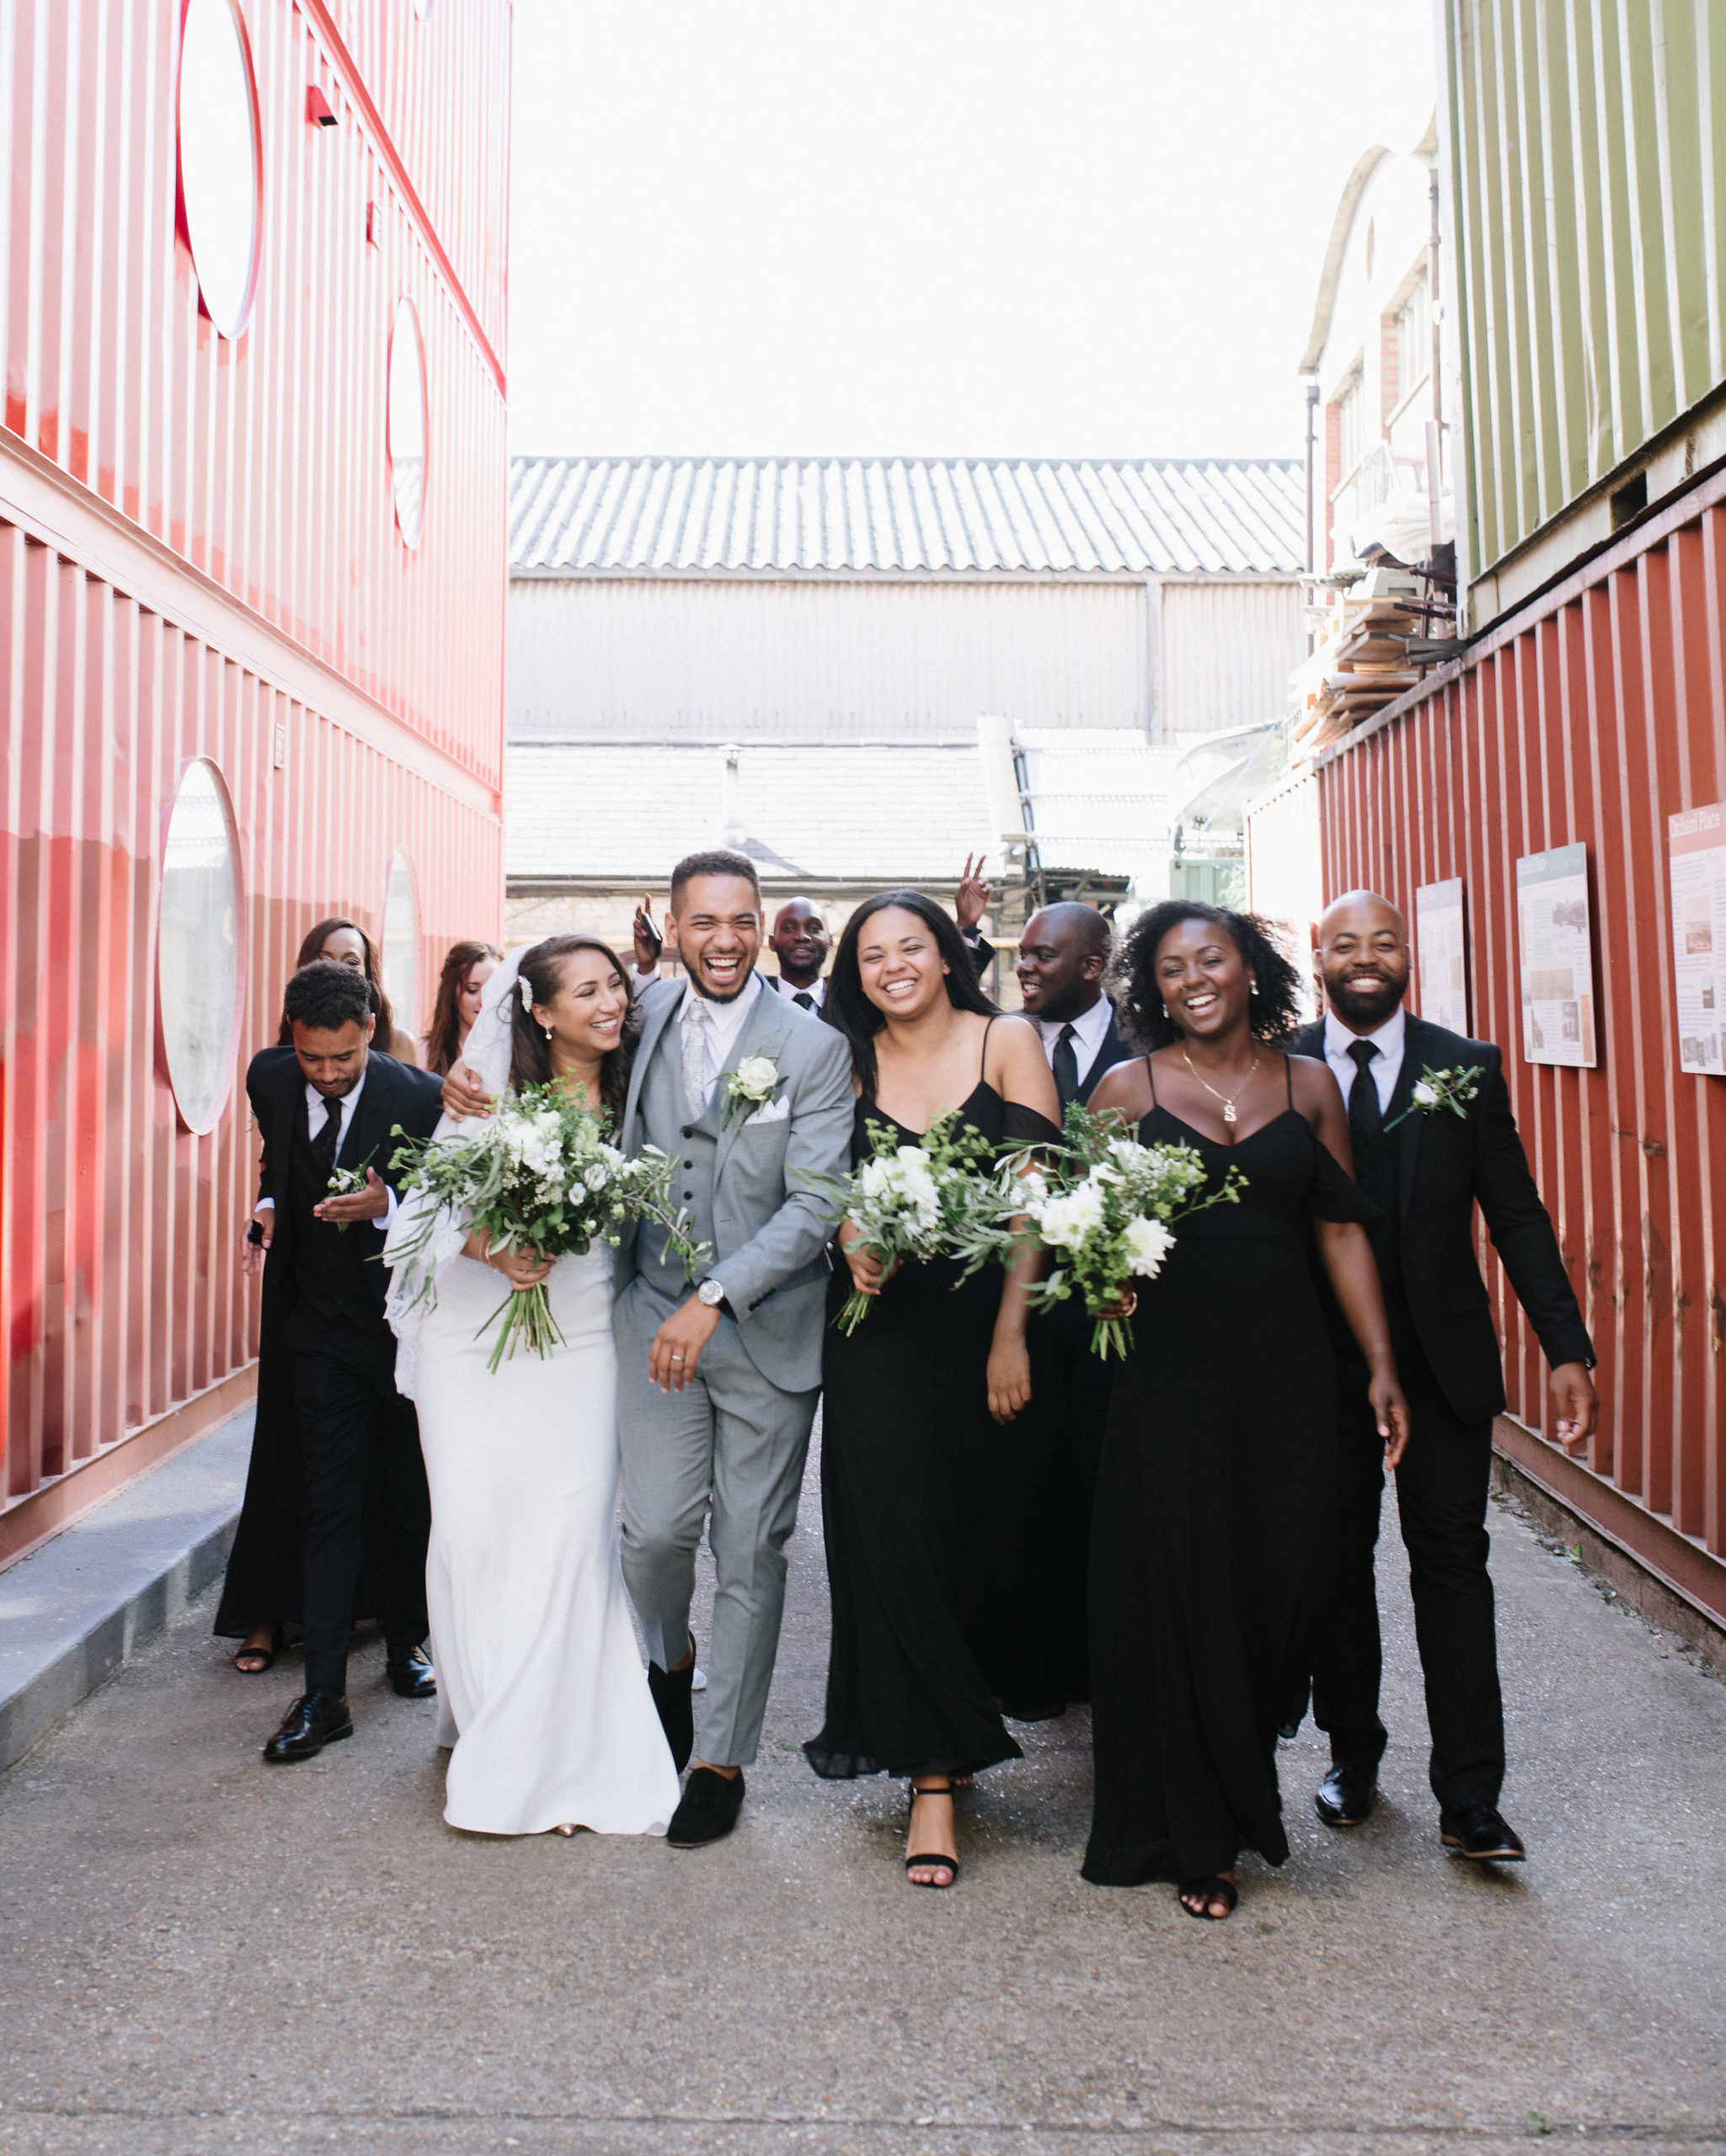 Industrial wedding outfits